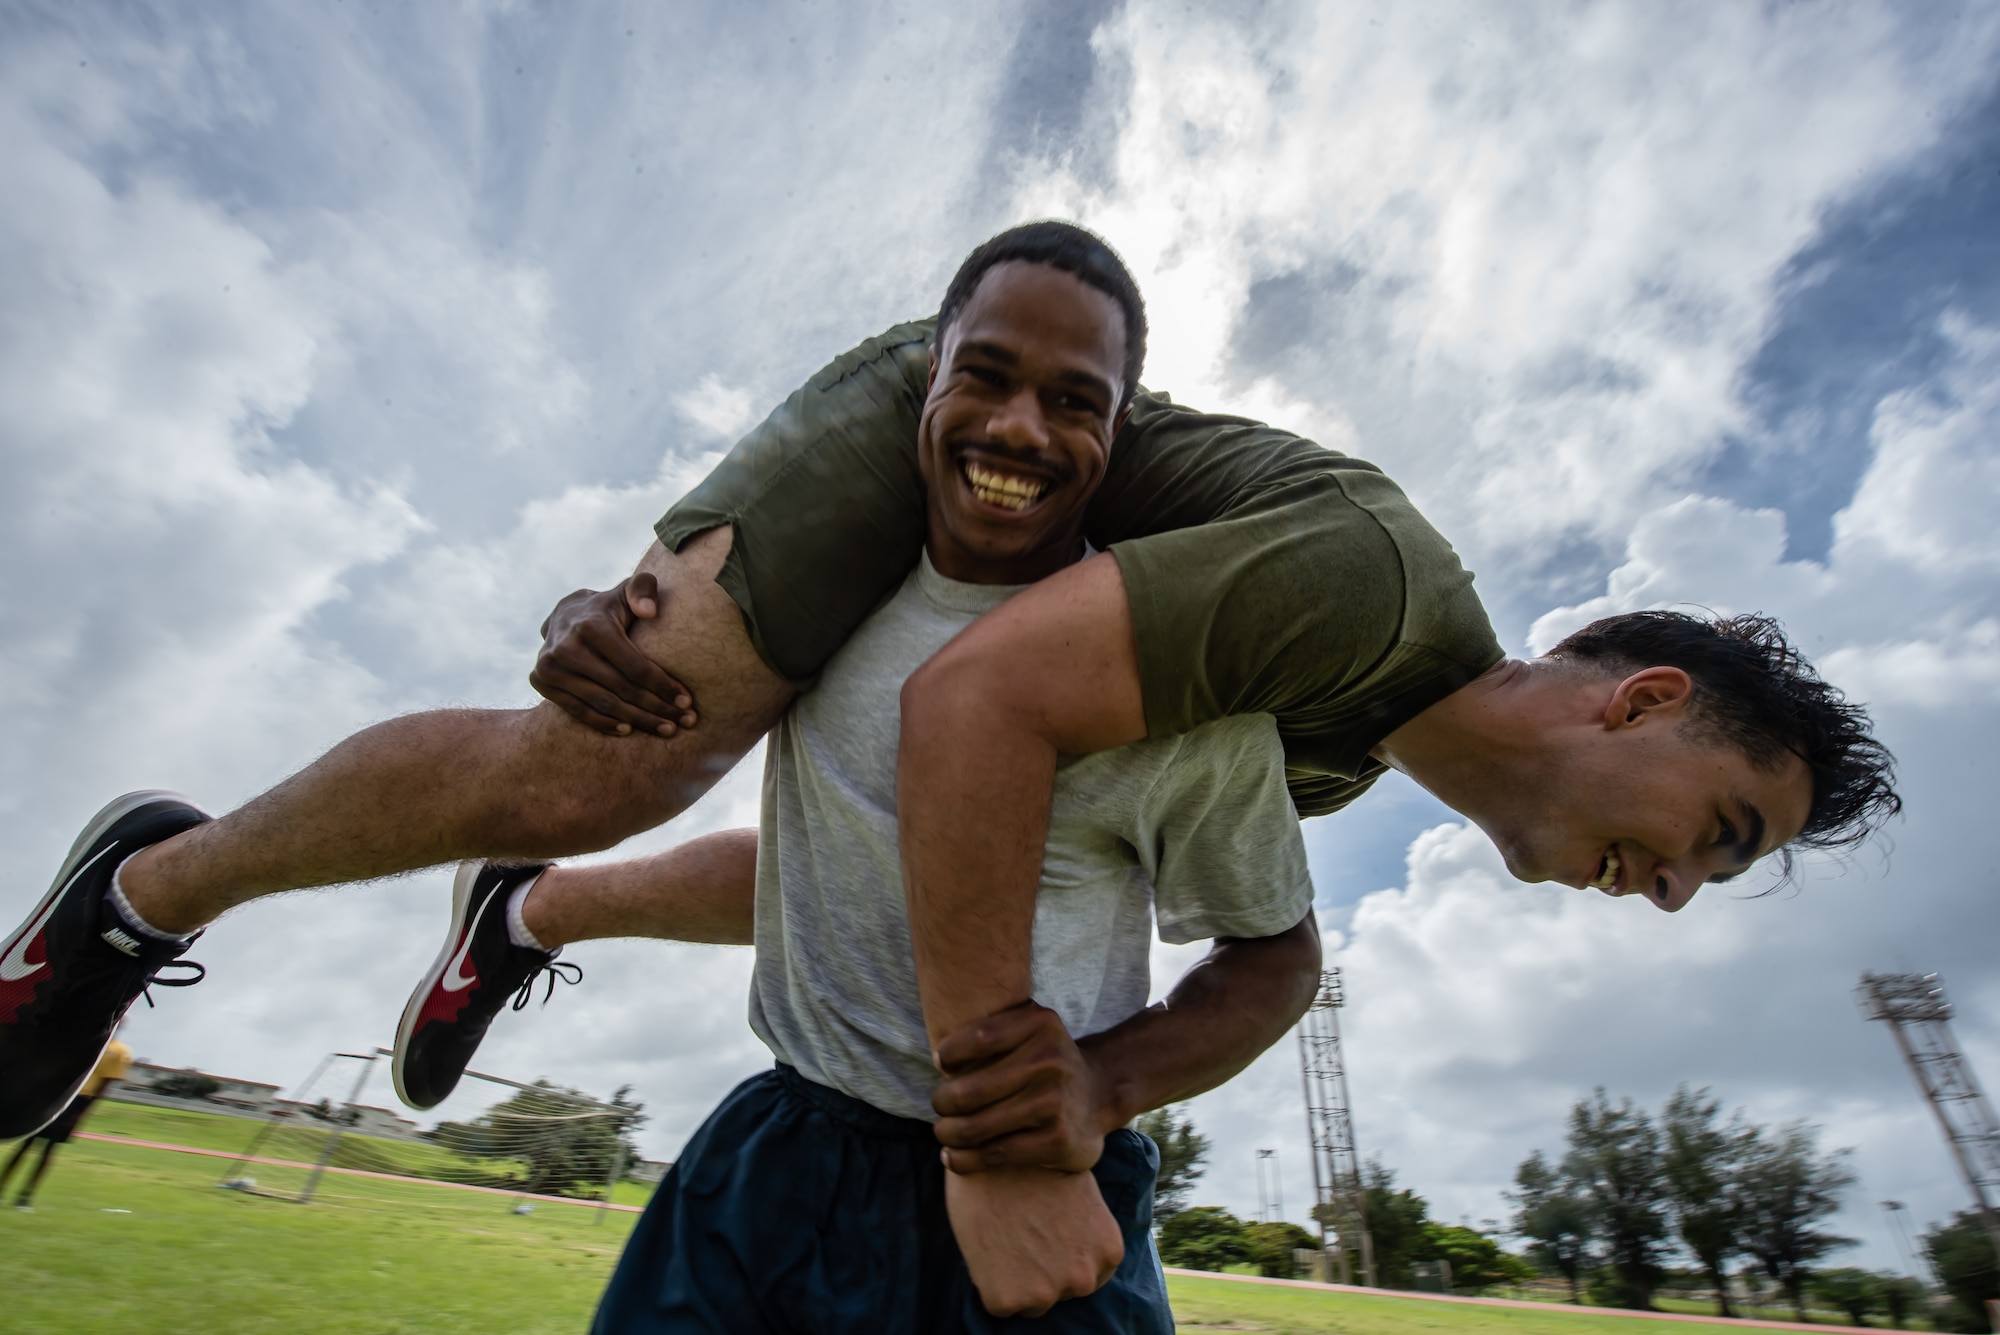 Air Force Staff Sgt. Amann Davis, Okinawa Joint Experience Red Team student, carries Marine Corps Sgt. Thomas Warren, OJE Red Team student, during the Okinawa Joint Fitness Challenge Sept. 26, 2018, at Kadena Air Base, Japan. The OJFC was designed to mimic obstacles and challenges faced in the battlefield such as sprinting, running ammunition cans, transporting wounded personnel to safety and tossing simulated grenades. (U.S. Air Force photo by Staff Sgt. Micaiah Anthony)